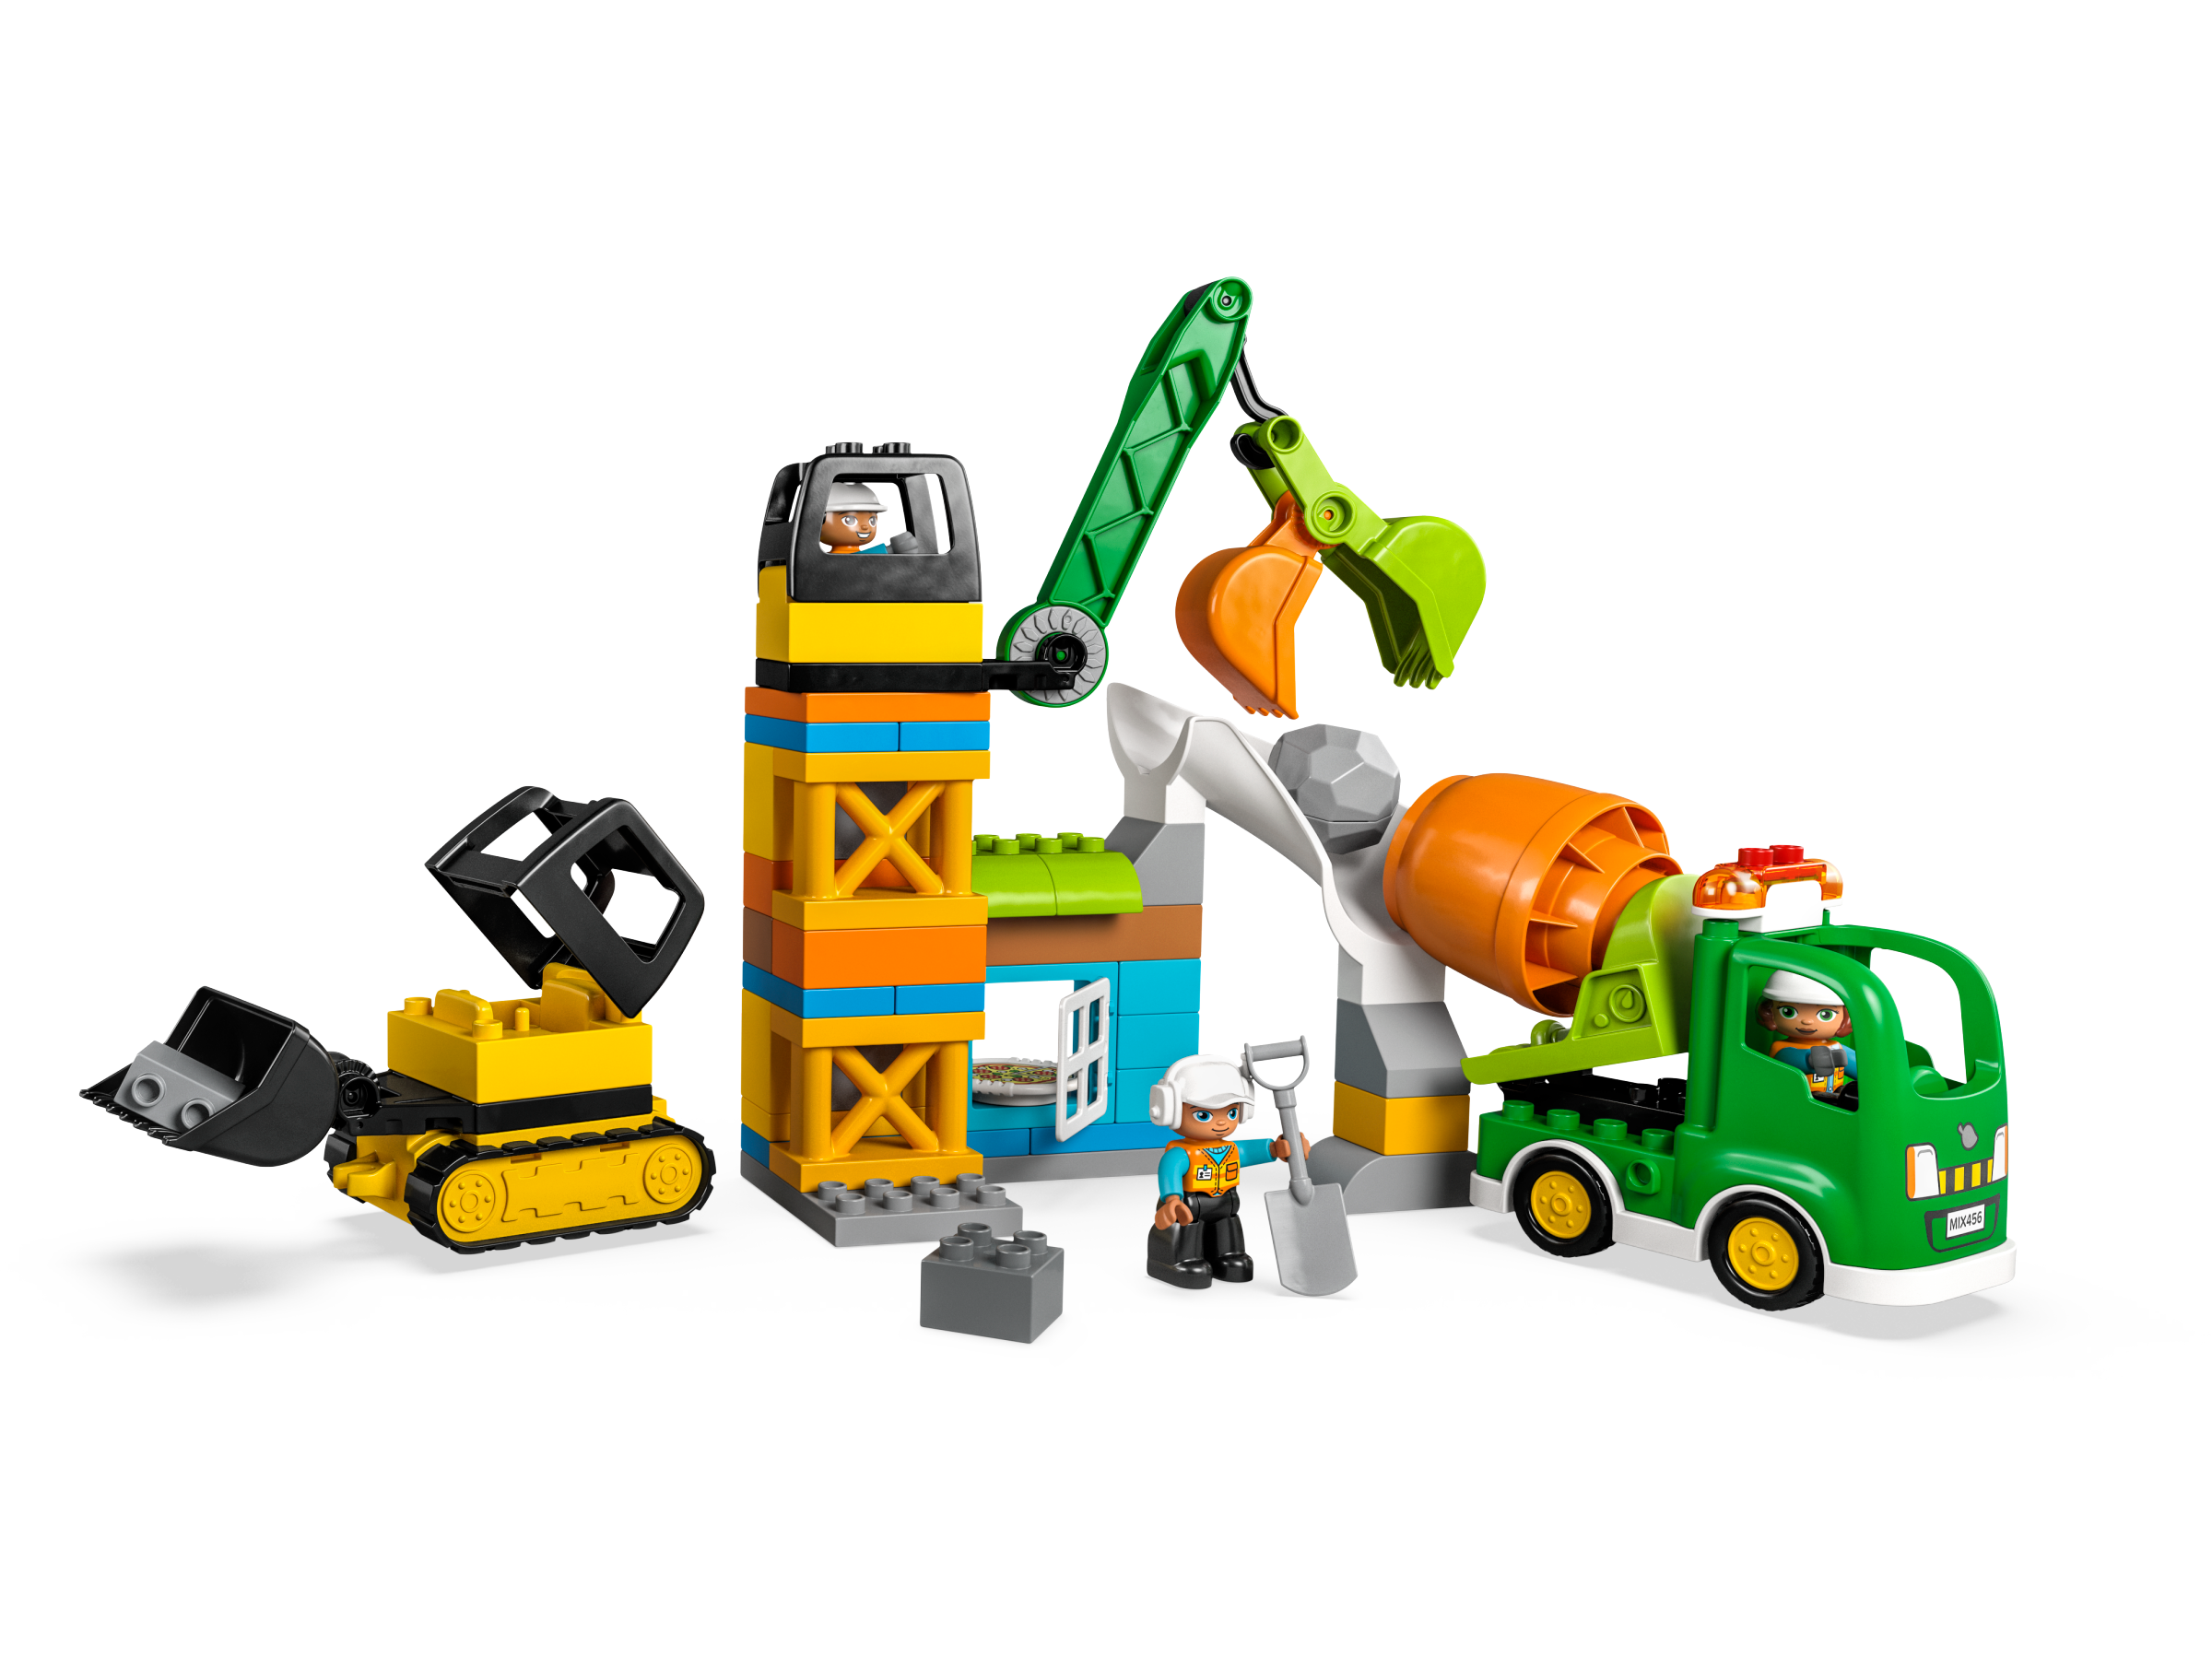 Construction Site 10990 | DUPLO® | online at Official LEGO® US